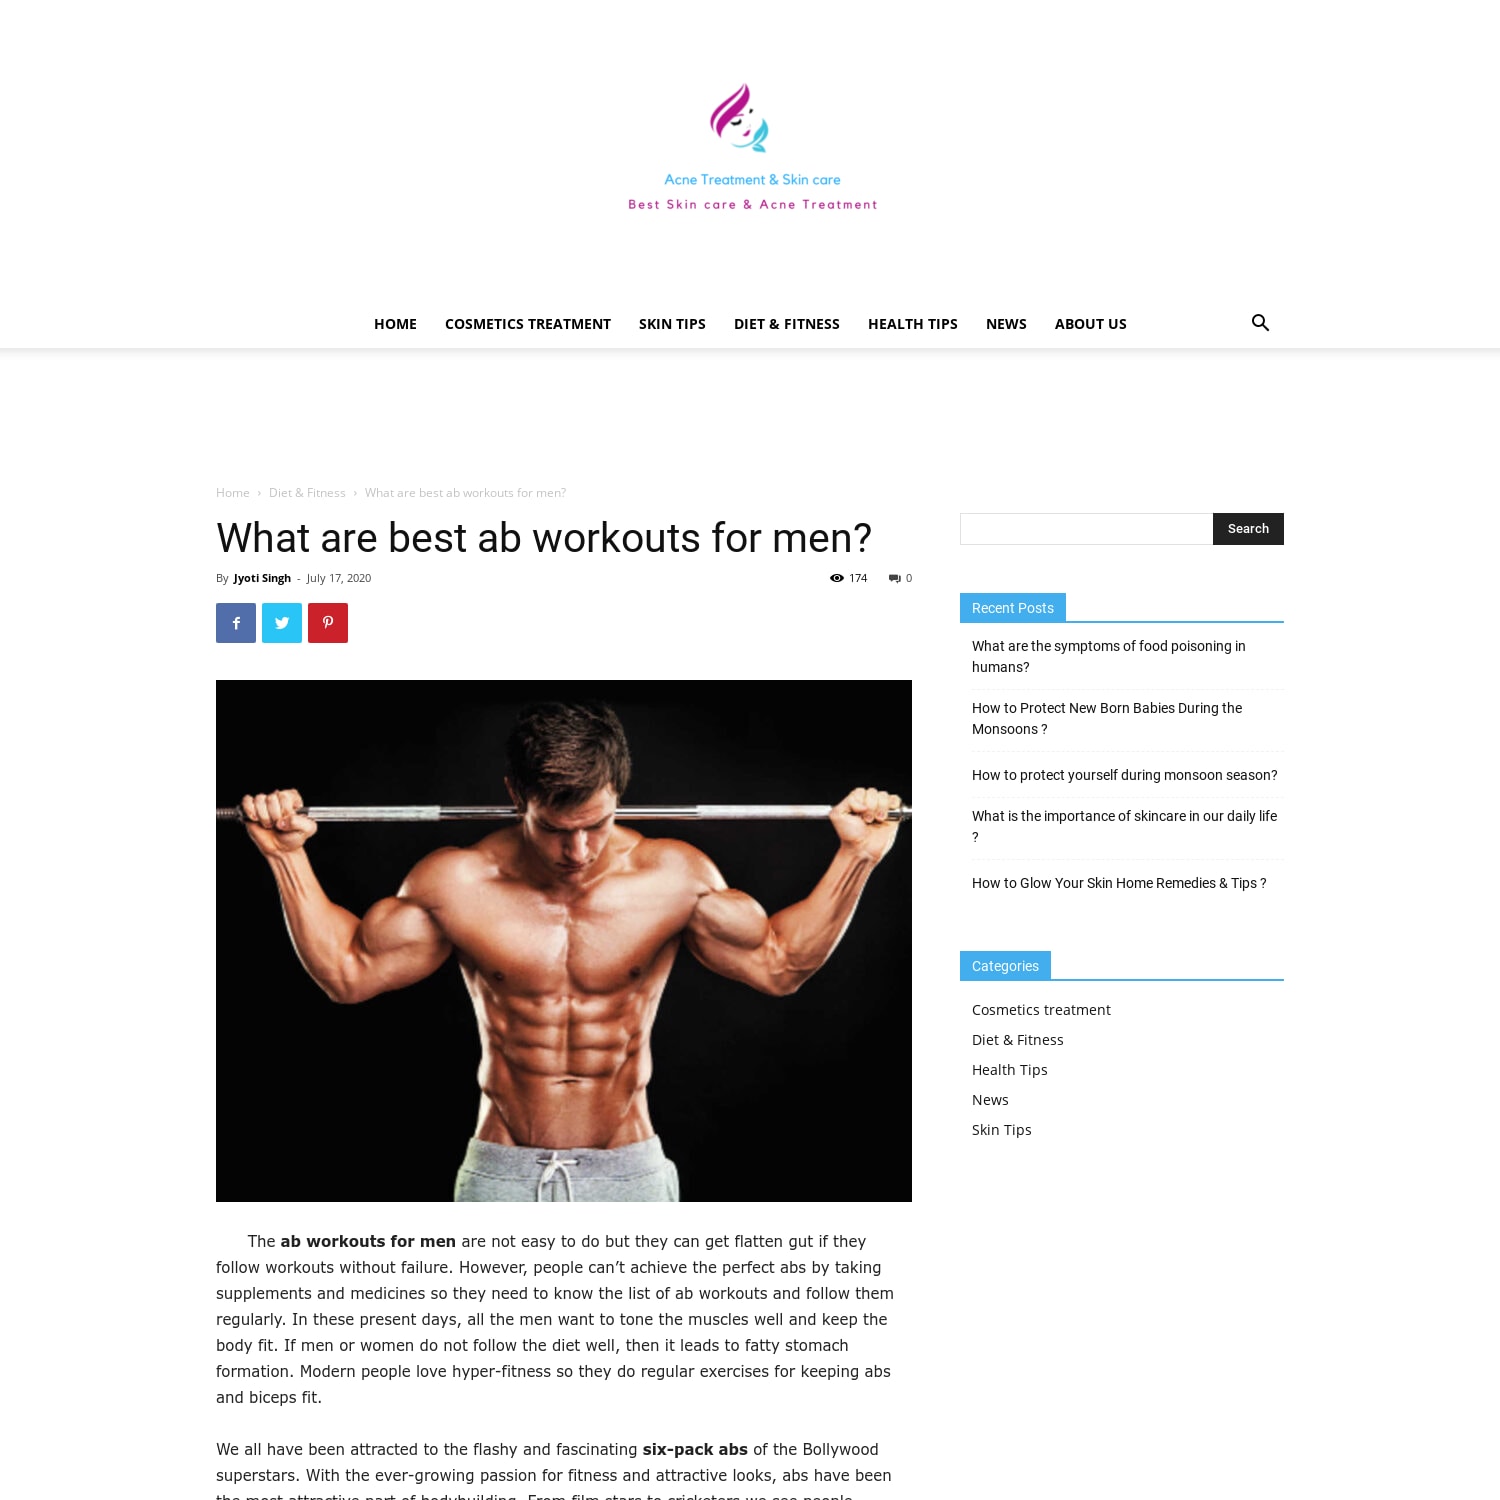 What are best ab workouts for men? - Skin Care & Acne Treatment